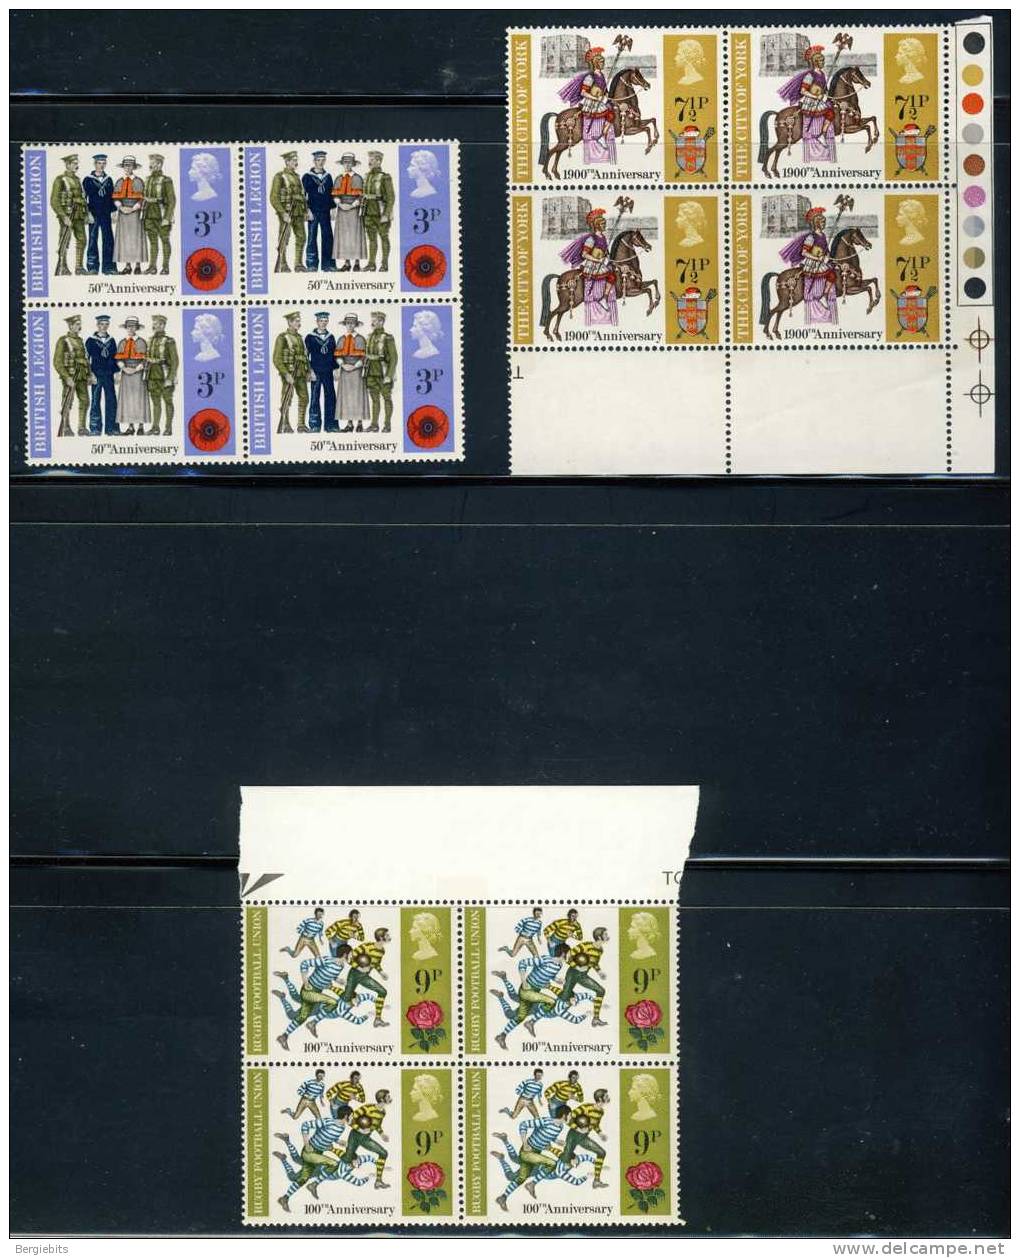 1971 Great Britain Complete Set Of 3 MNH Blocks Of 4 " 3 Different Anniversaries,Rugby,Legio N And York" - Unused Stamps